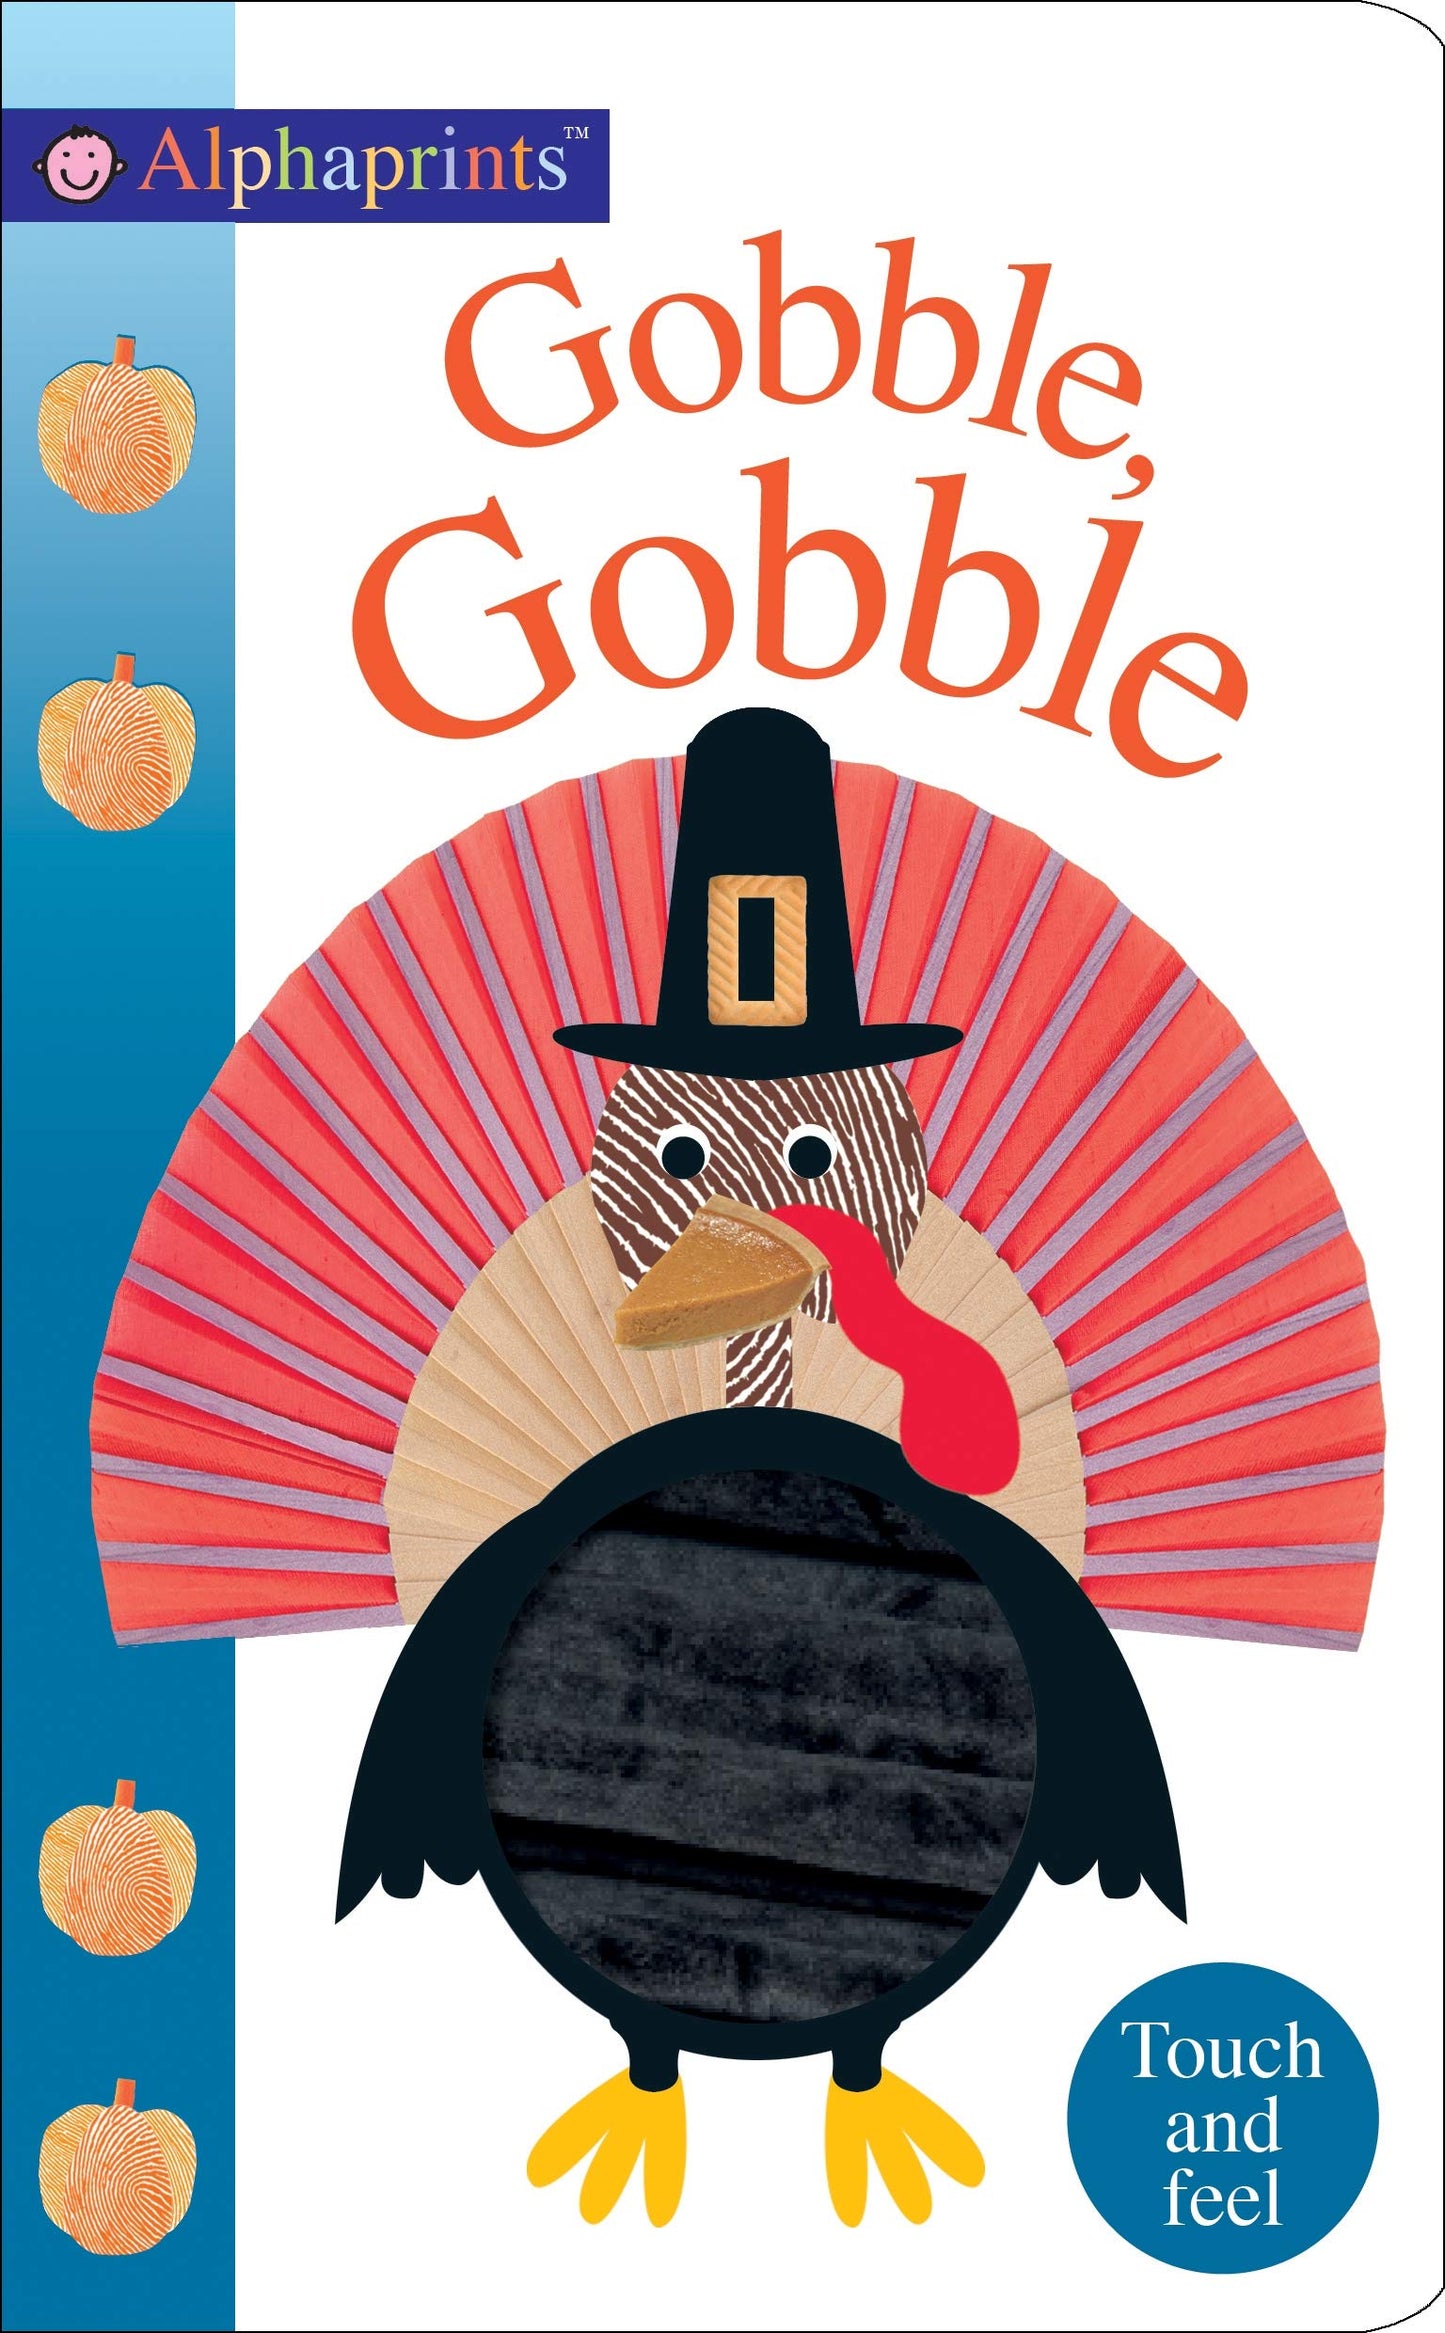 Alphaprints: Gobble Gobble: Touch and Feel